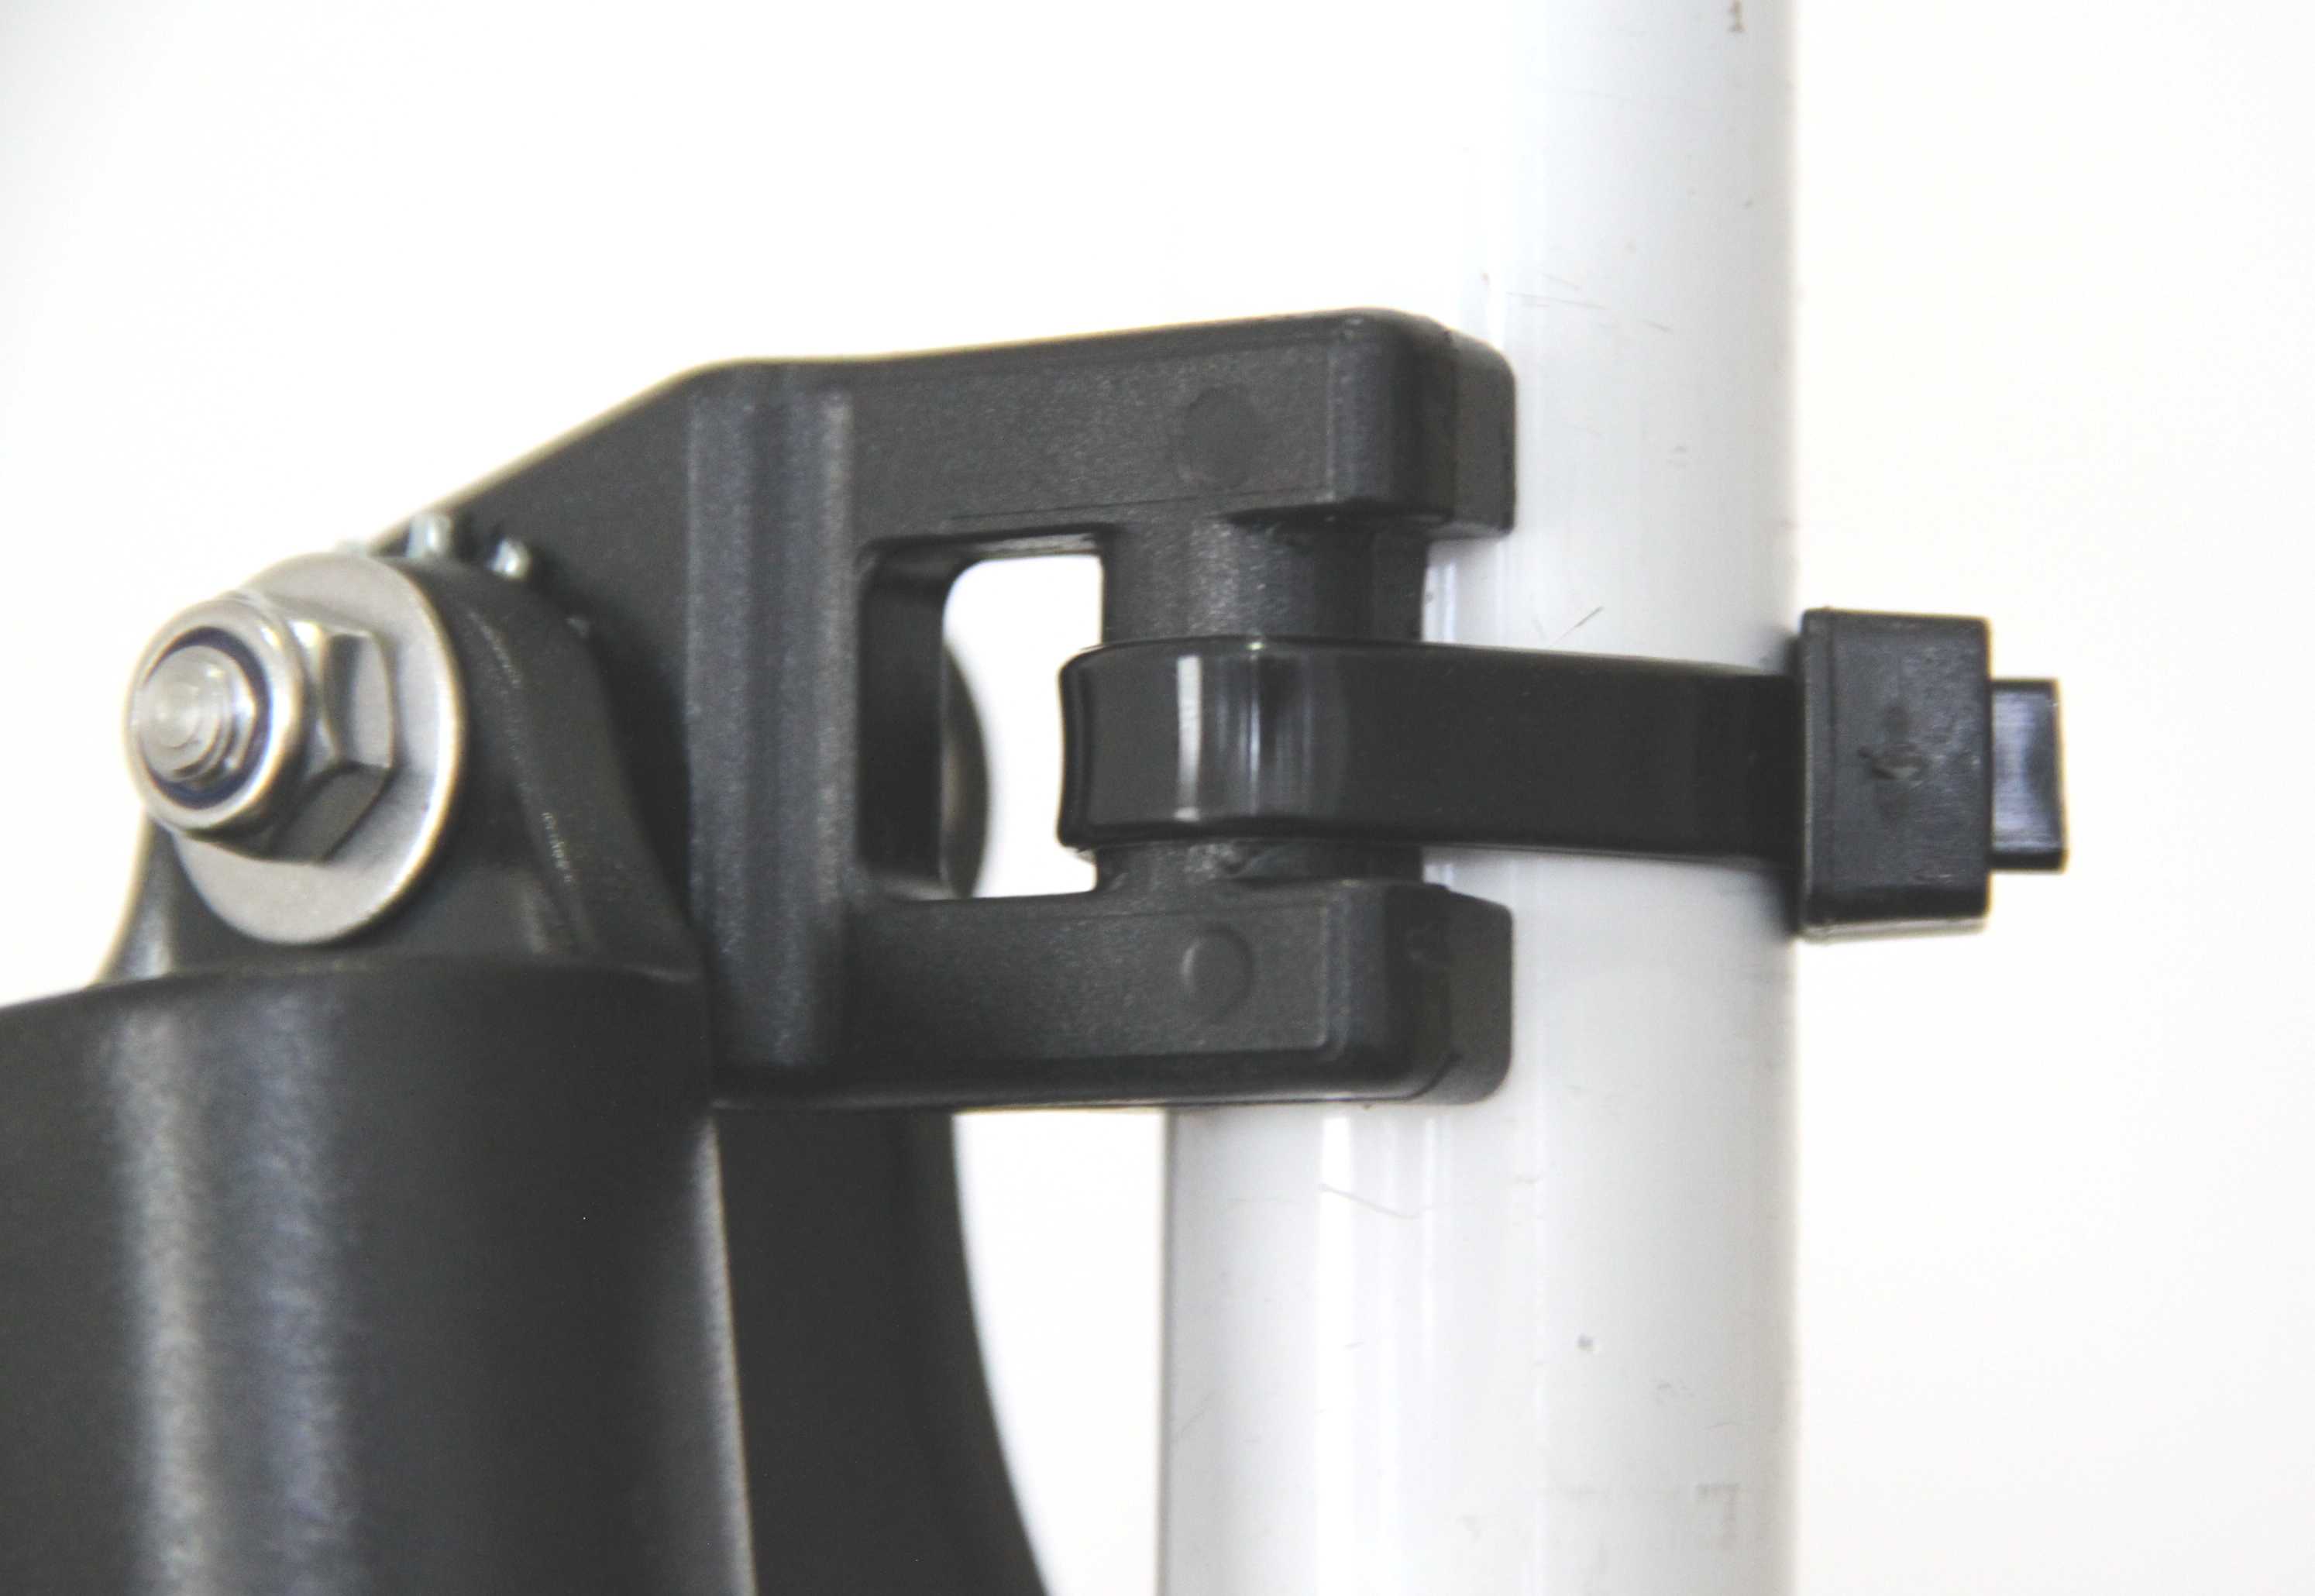 Holder attached with 7.6mm wide cable tie